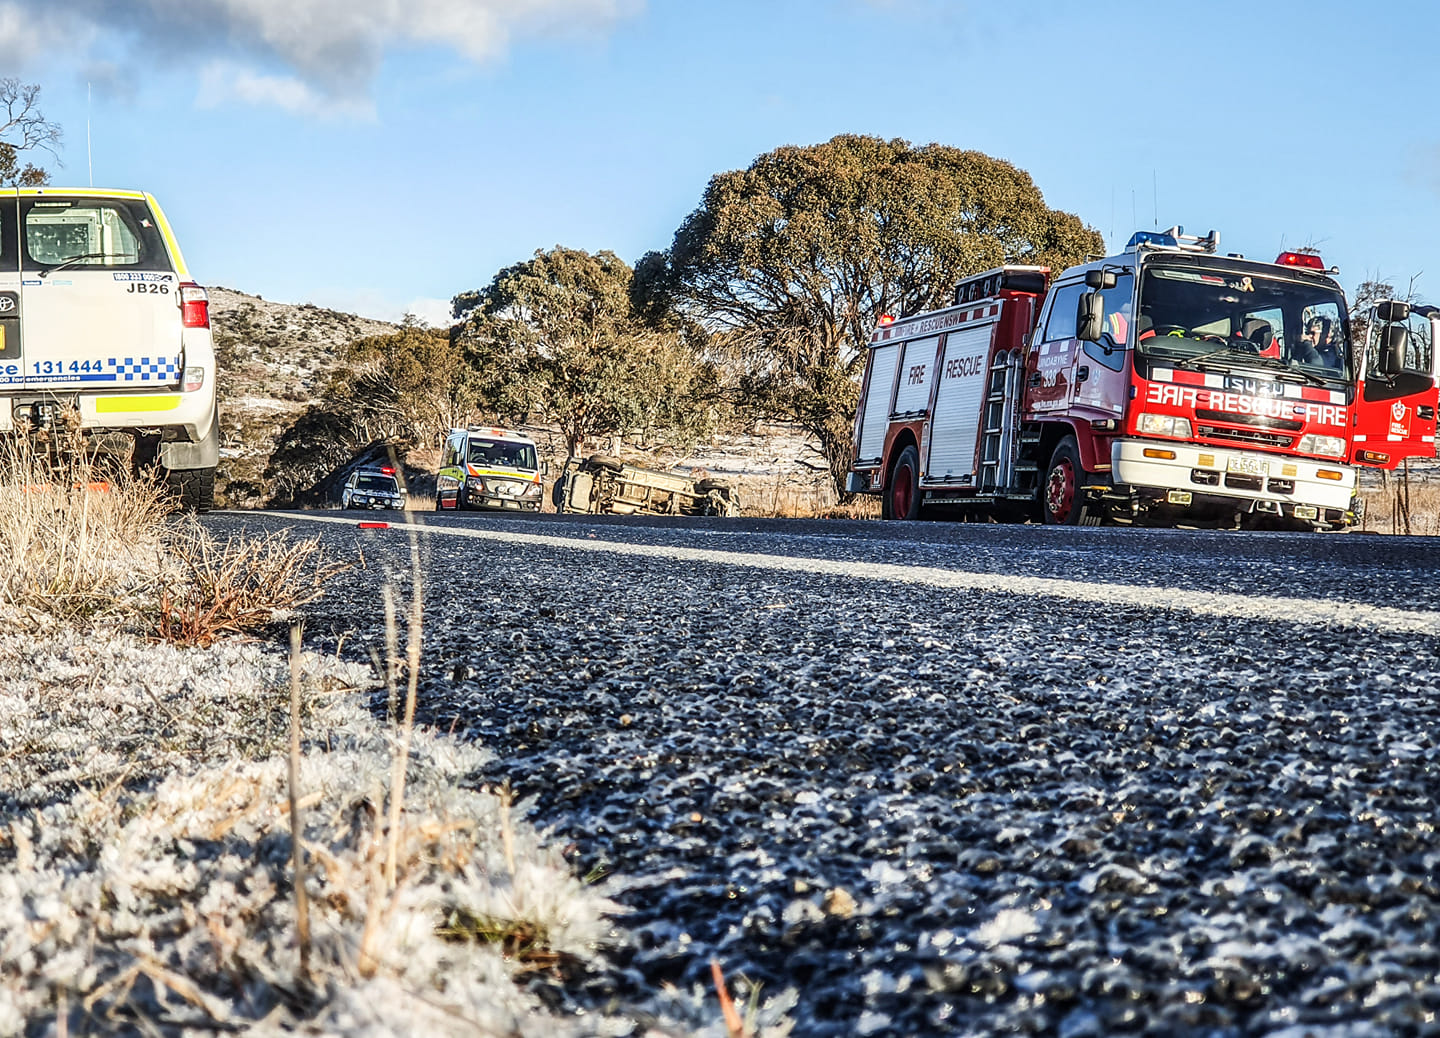 Coastal fire and mountain ice - what a weekend in South East NSW!